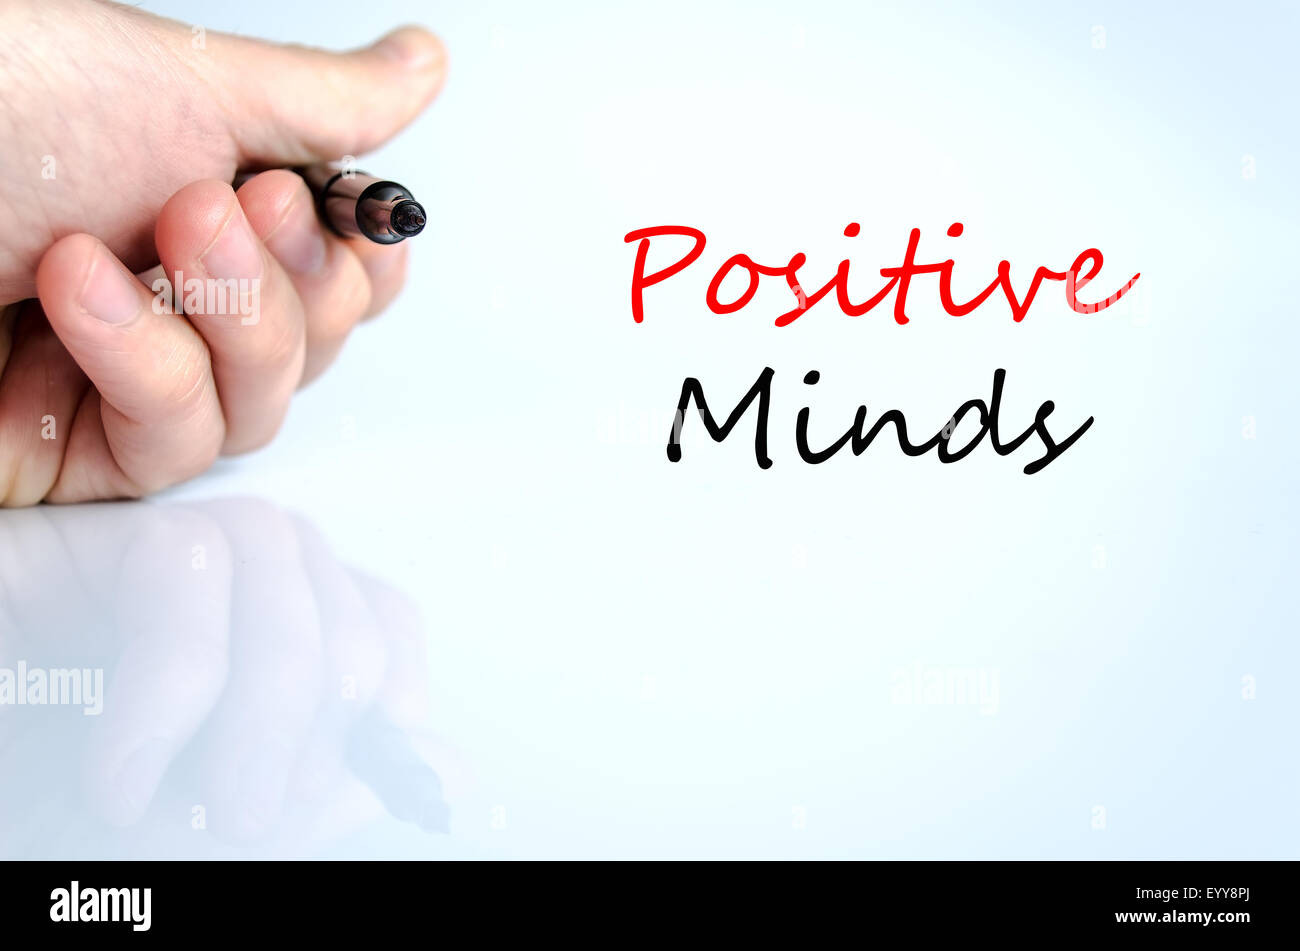 Positive minds text concept isolated over white background Stock Photo